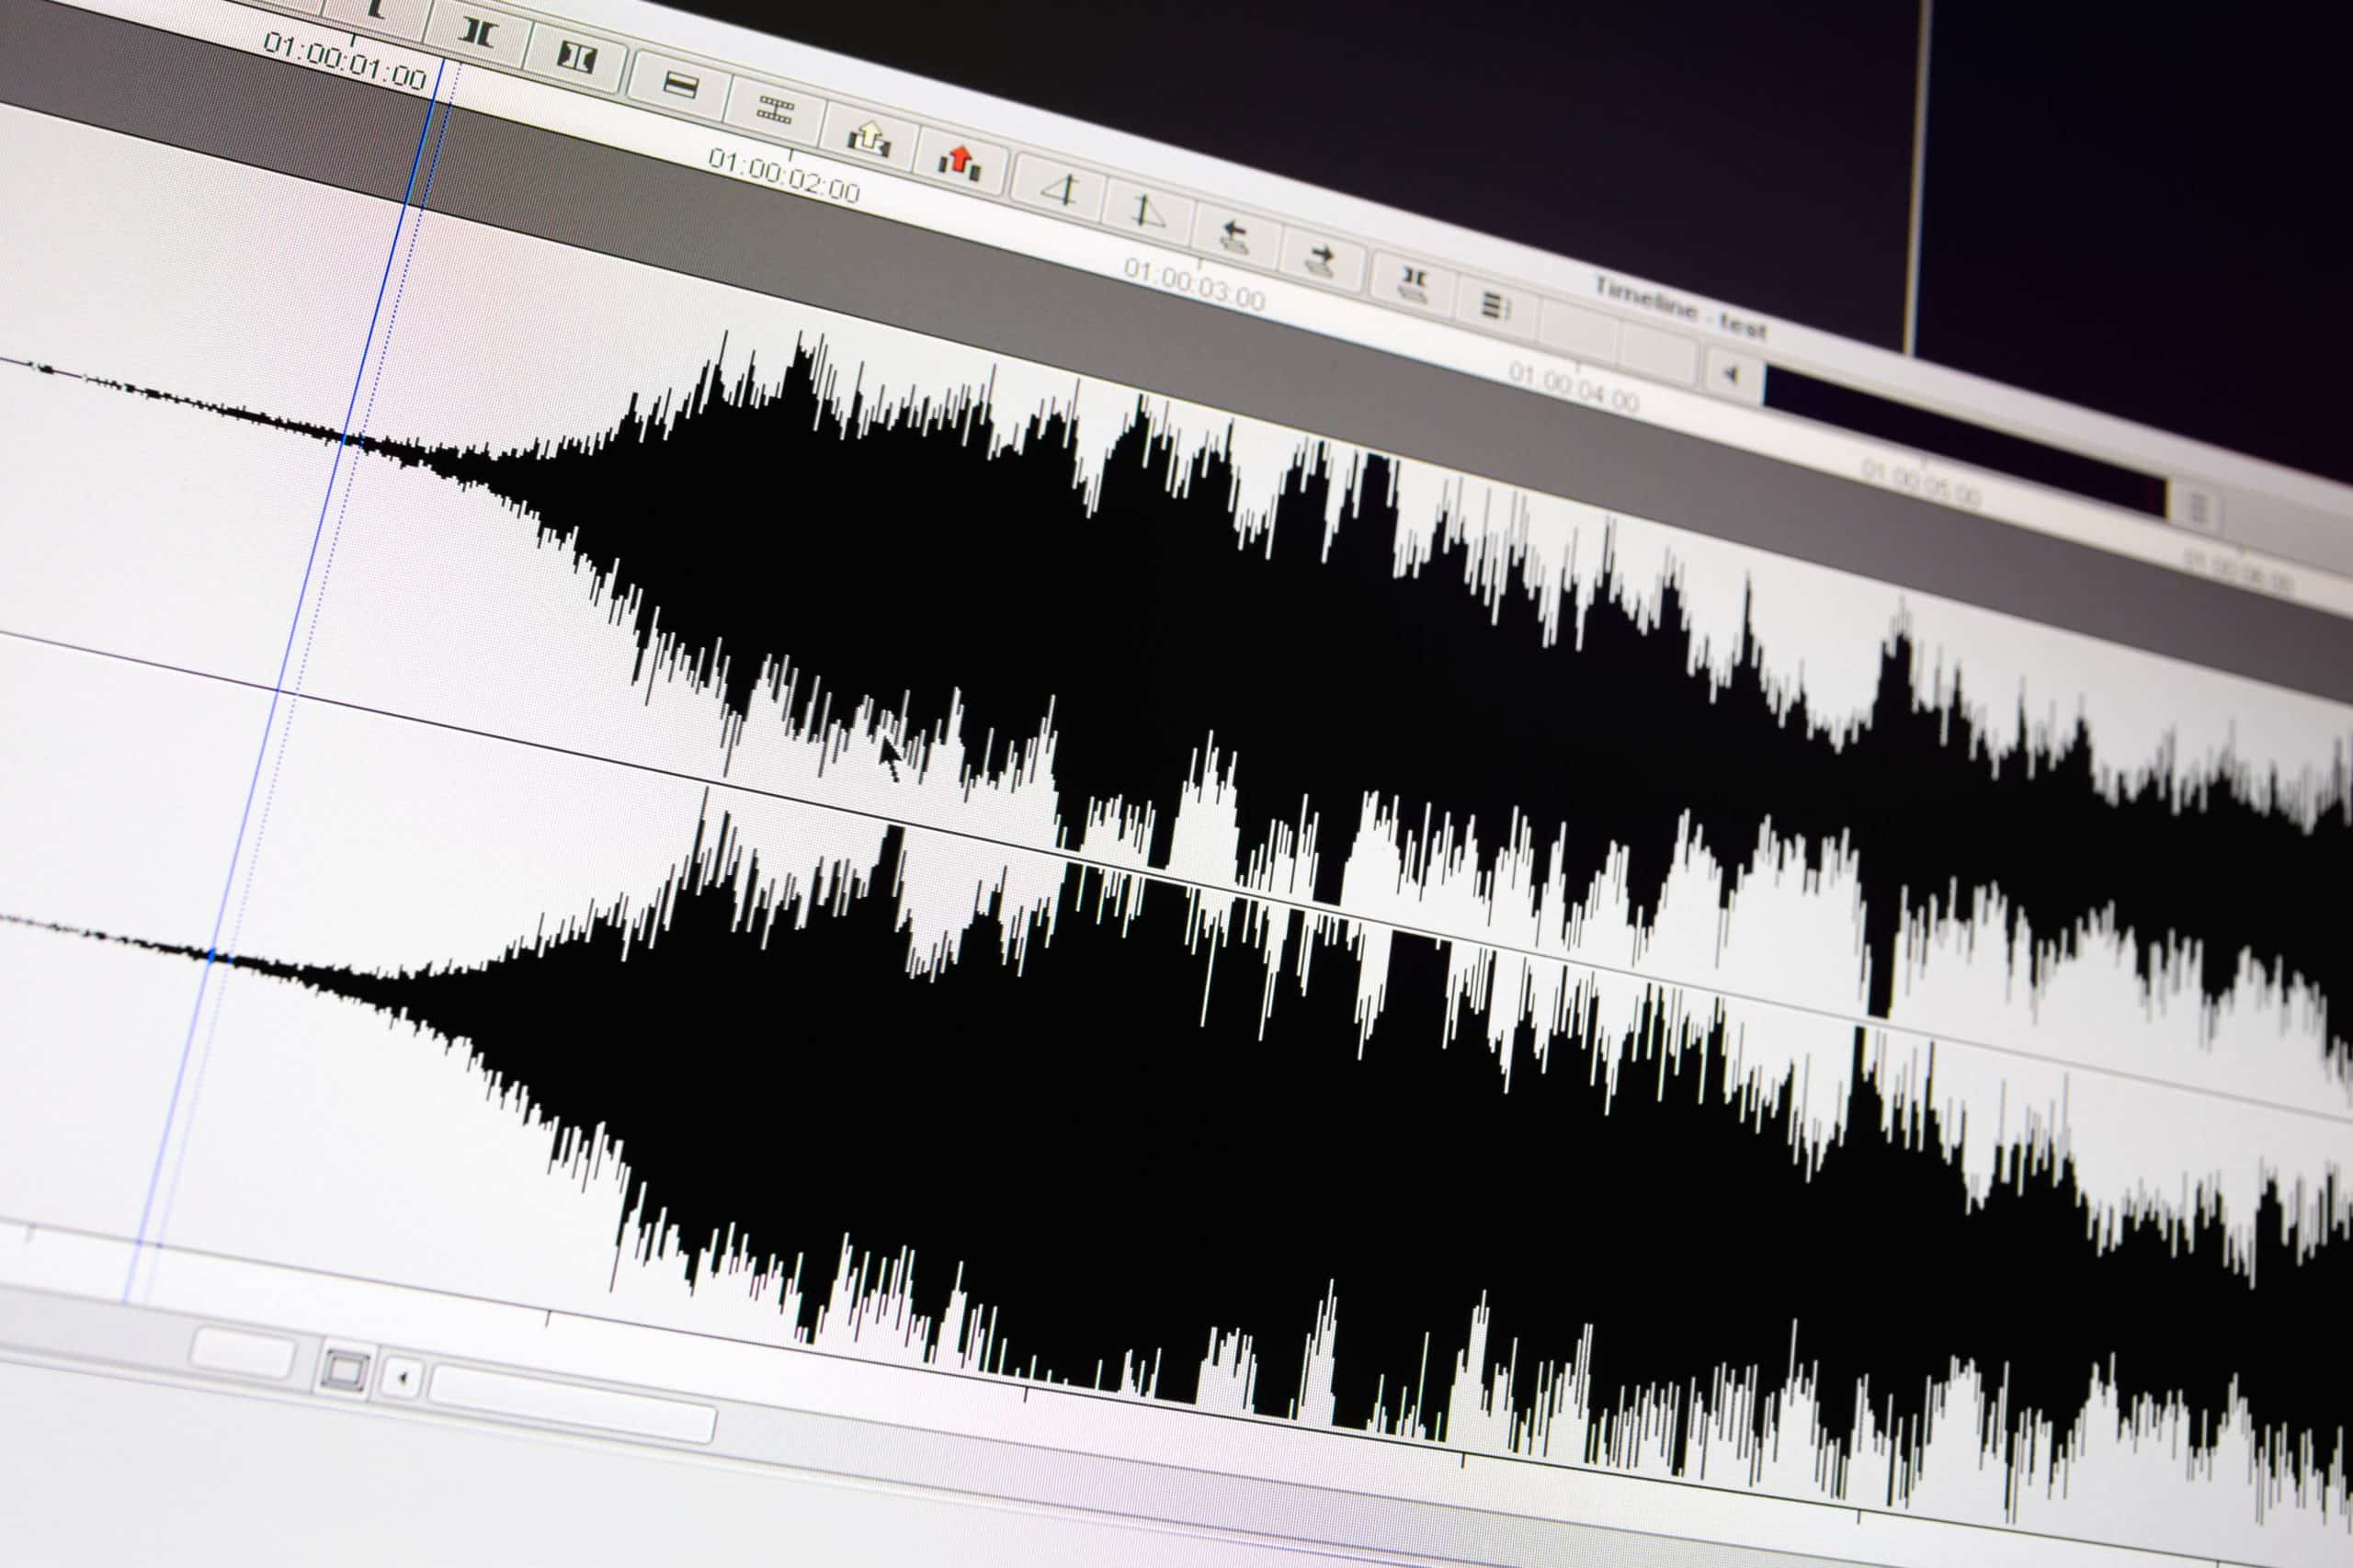 Tips for improving your sound editing skills